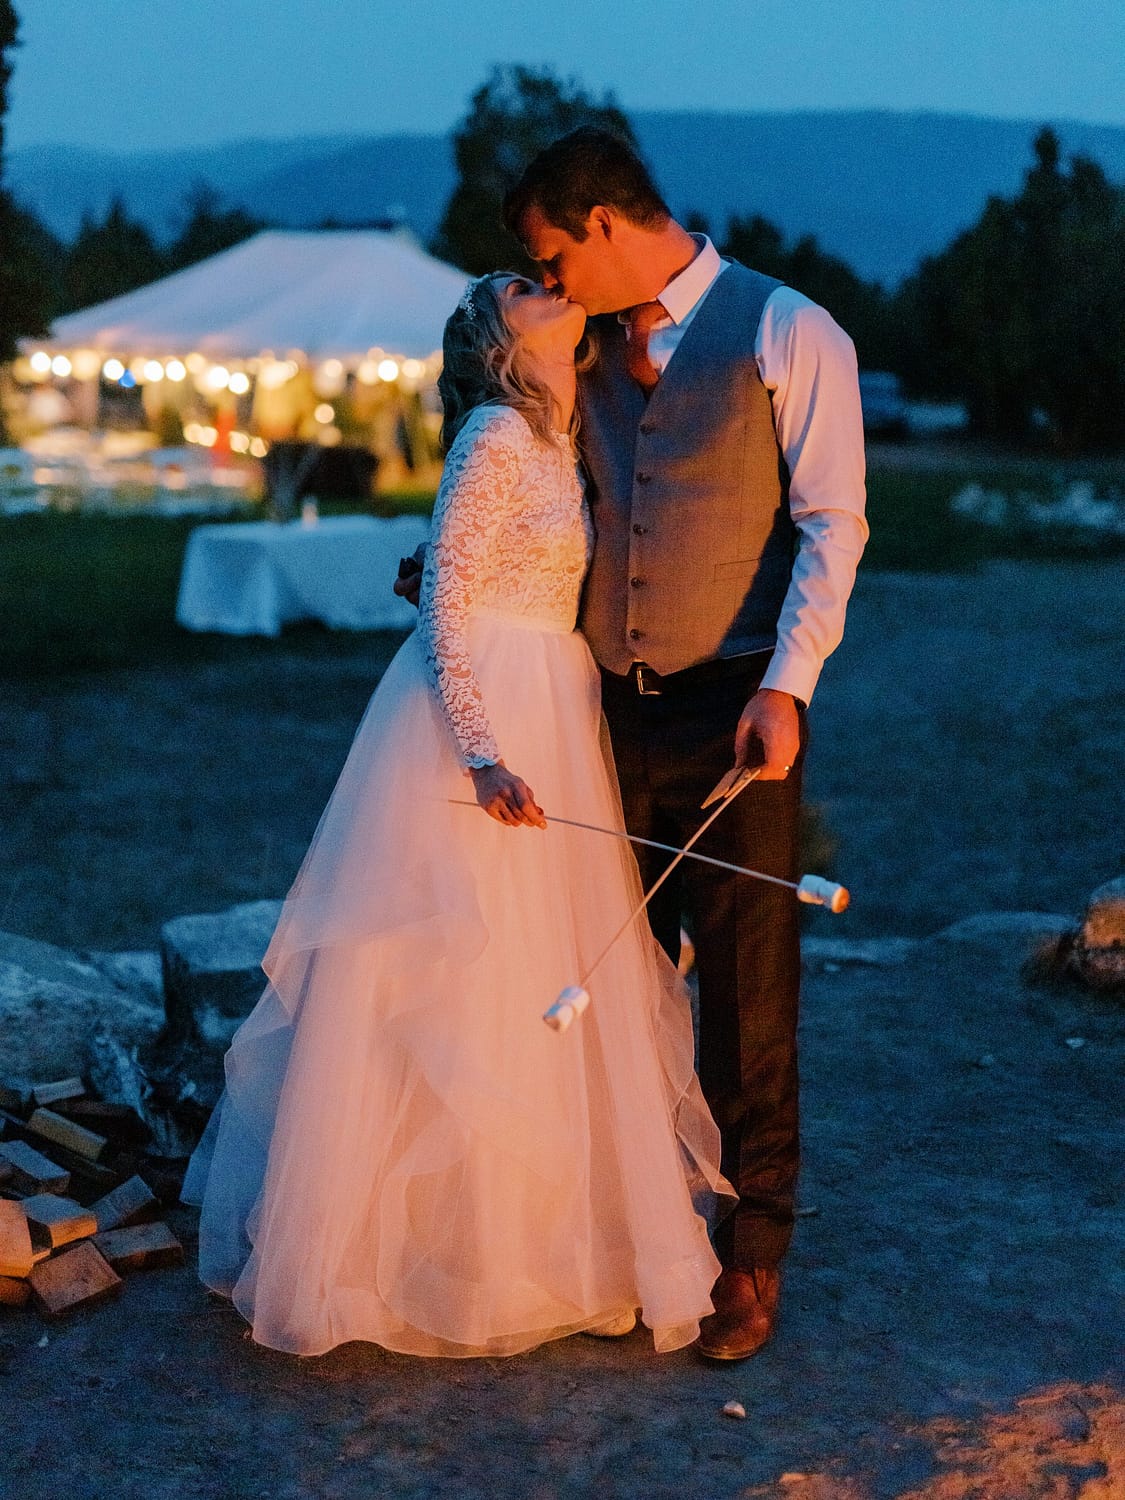 You are currently viewing UTAH’S RUSTIC, COUNTRY, WEDDING VENUE